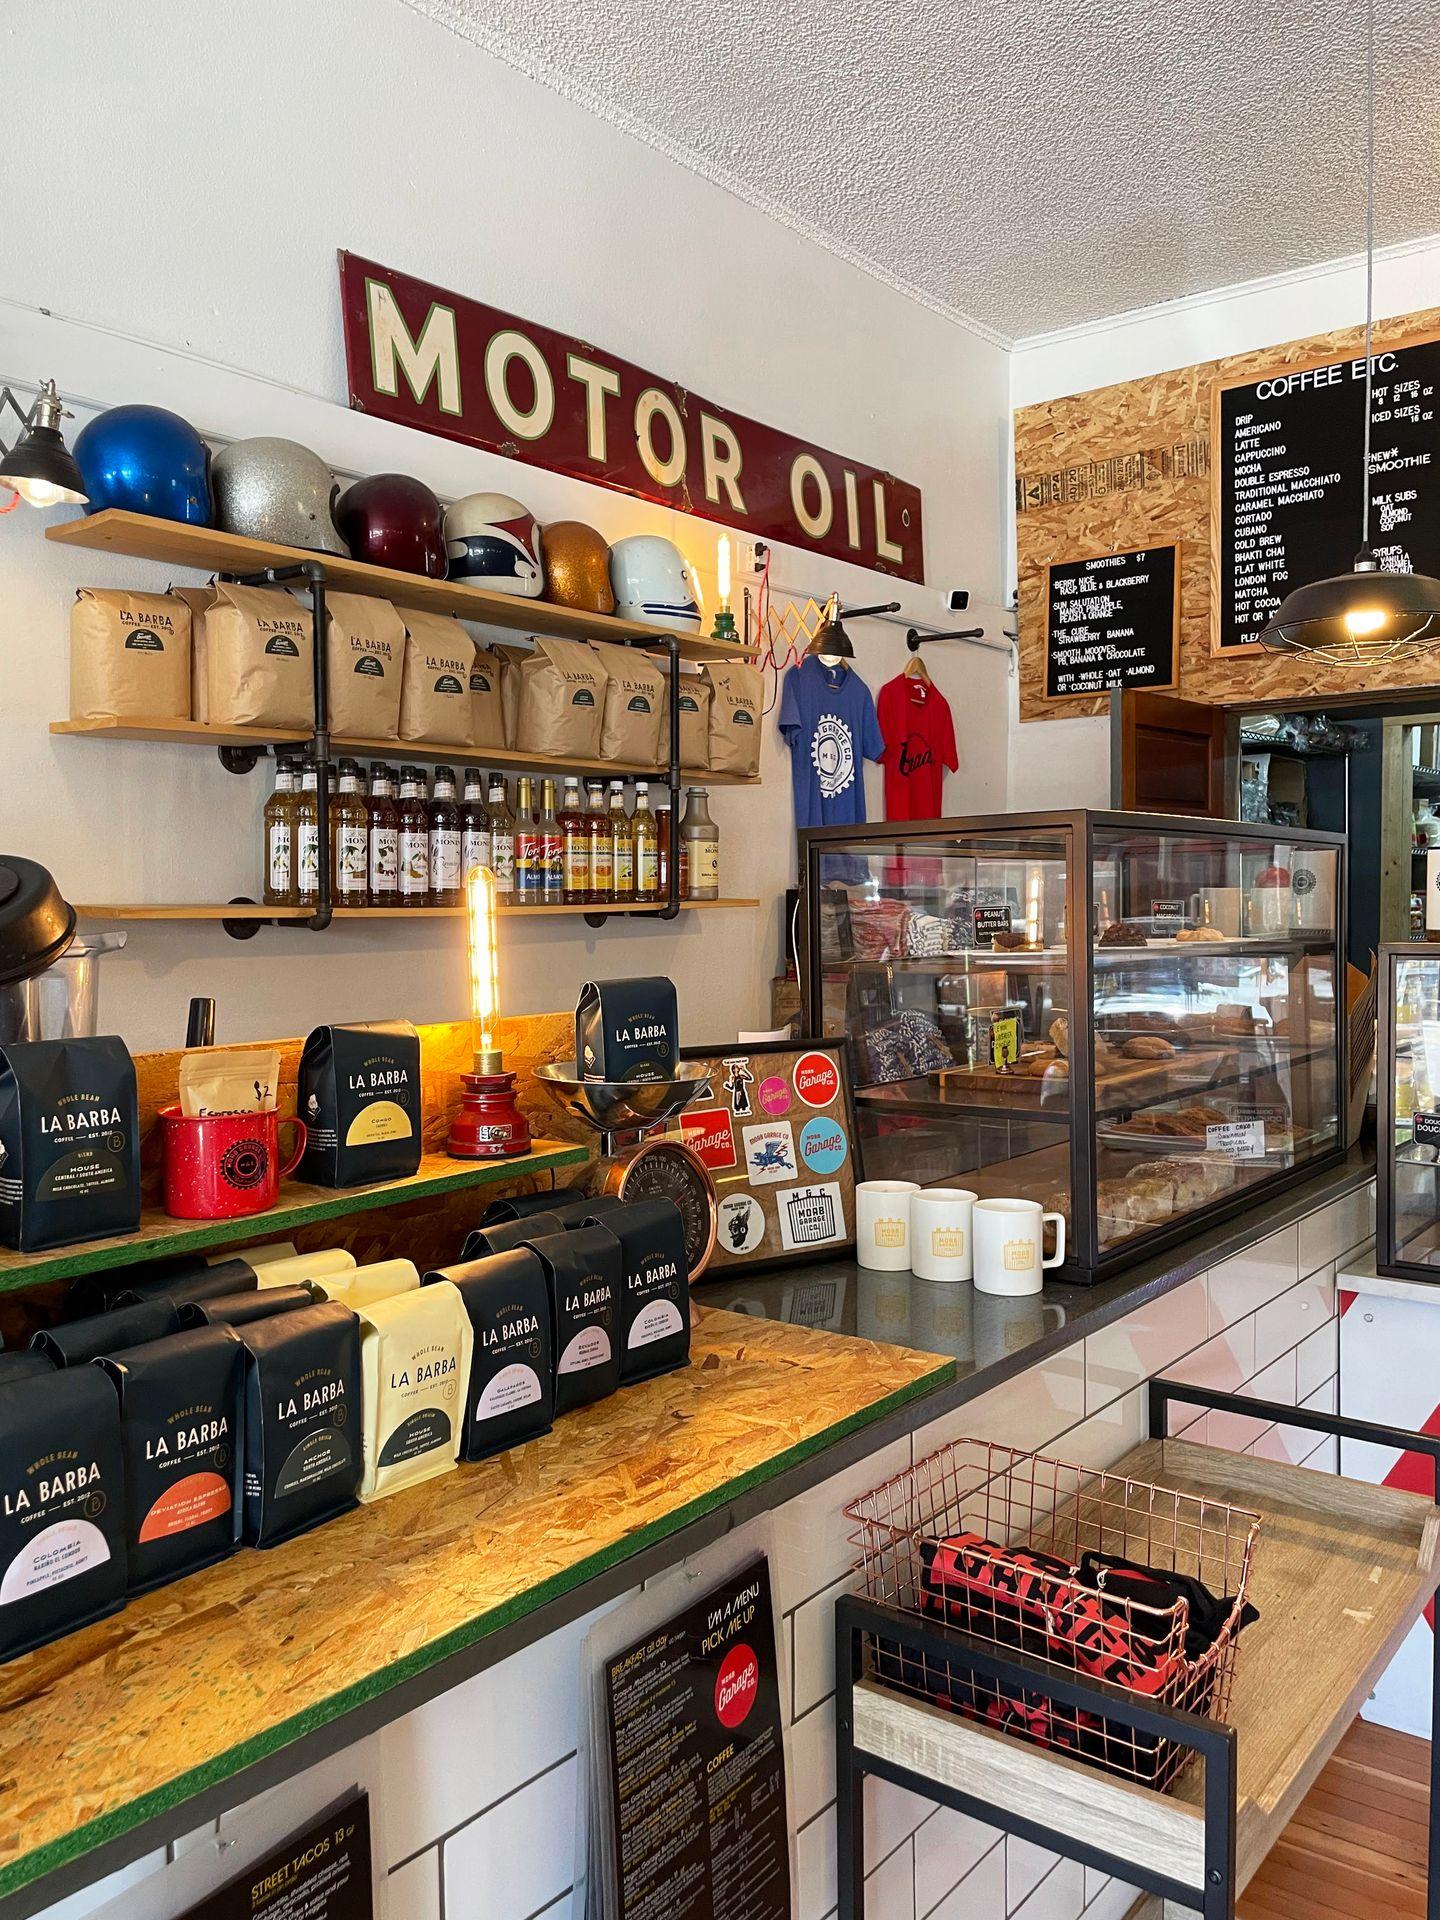 The interior of Moab Garage Co. There are bags of coffee beans on the counter and a sign that reads "motor oil" behind the counter.